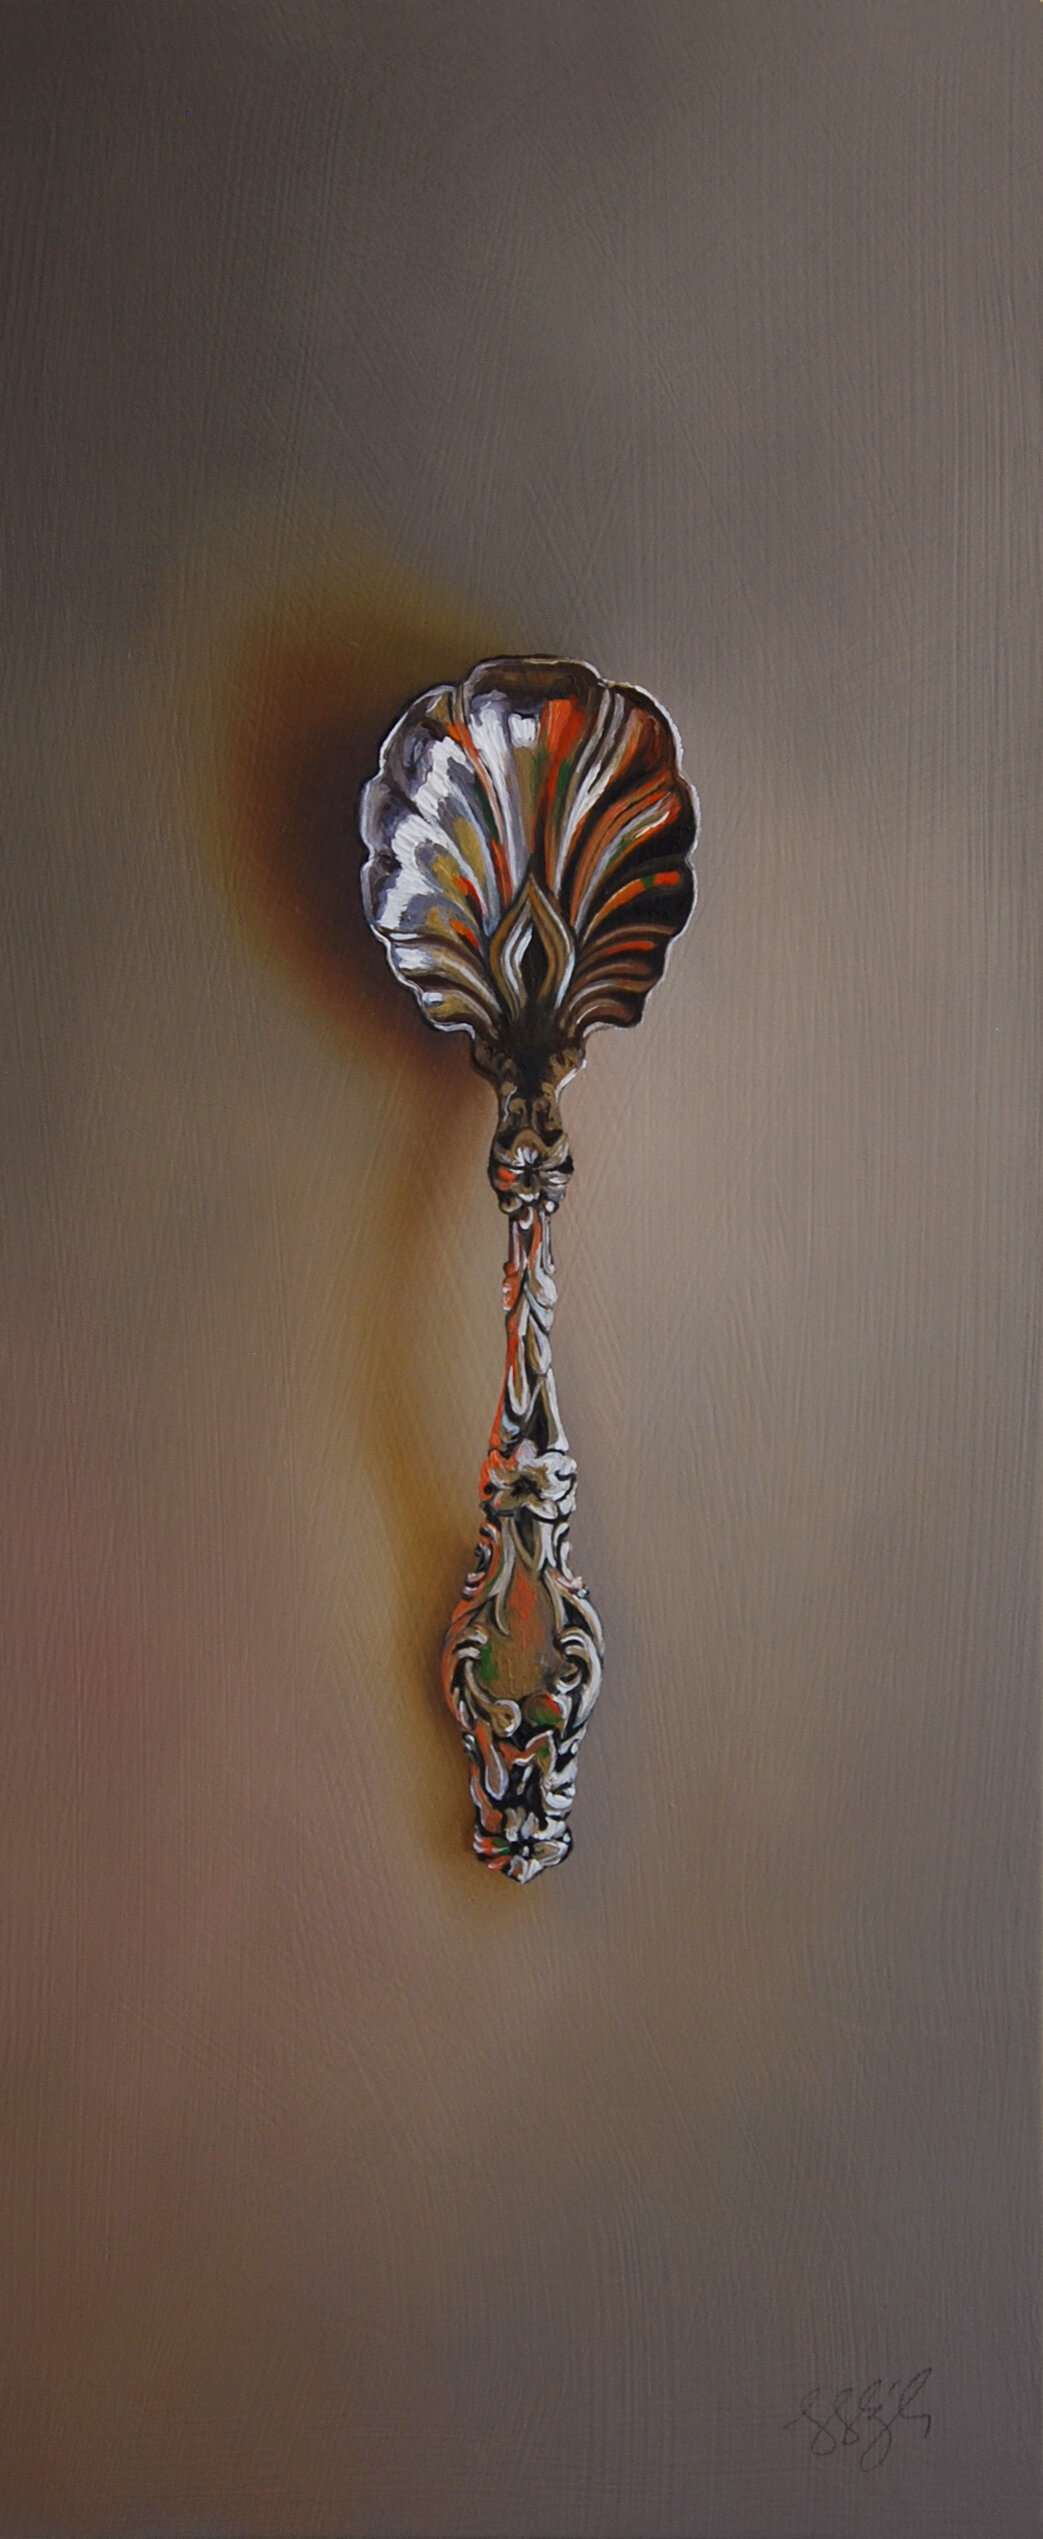   Silver Spoon #138, The Loneliest  Oil on panel, 2018. 12x5” 